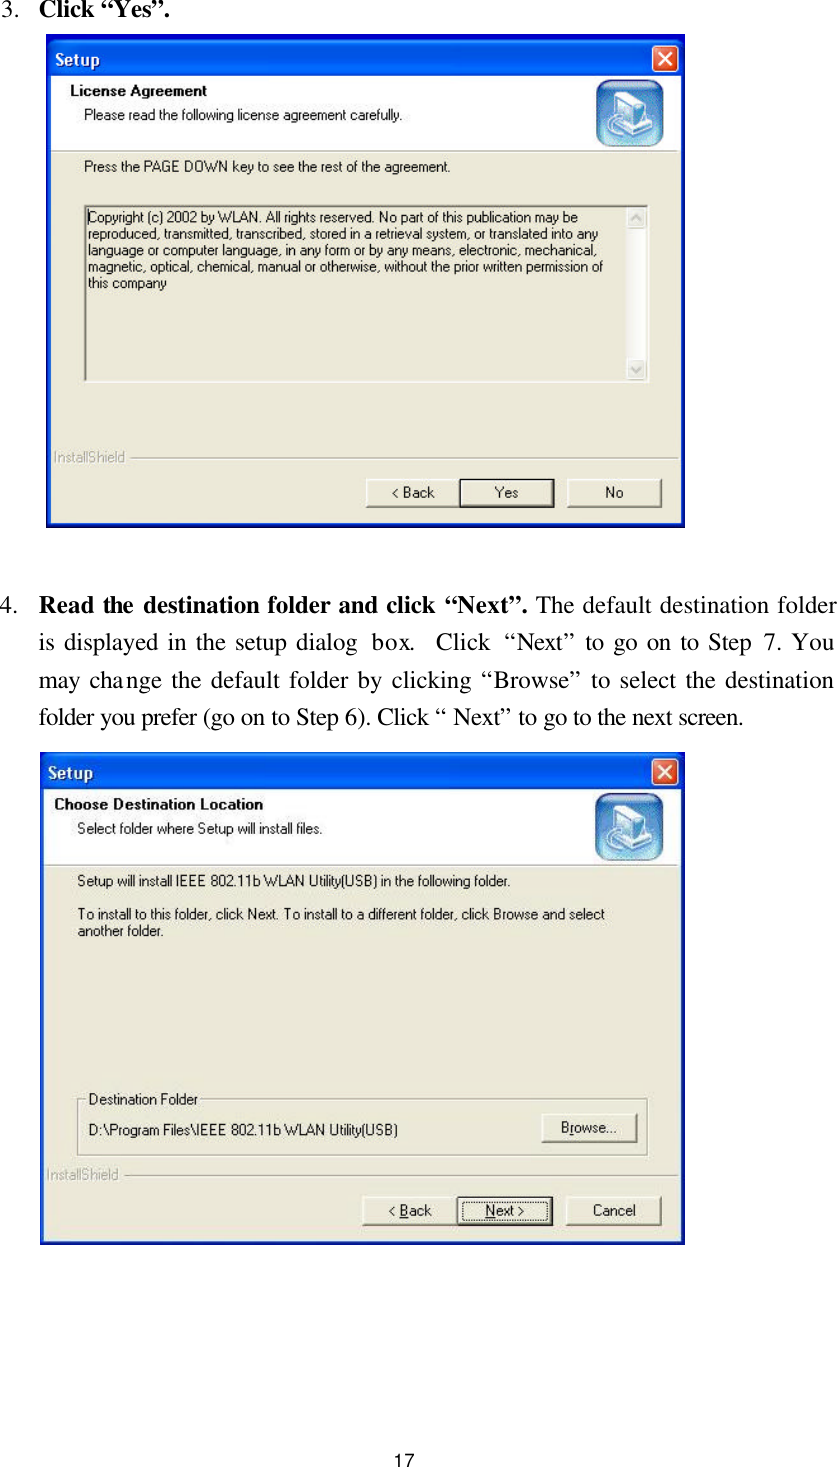  17 3.  Click “Yes”.                4.  Read the destination folder and click “Next”. The default destination folder is displayed in the setup dialog  box.  Click “Next” to go on to Step 7. You may change the default folder by clicking “Browse” to select the destination folder you prefer (go on to Step 6). Click “ Next” to go to the next screen.      